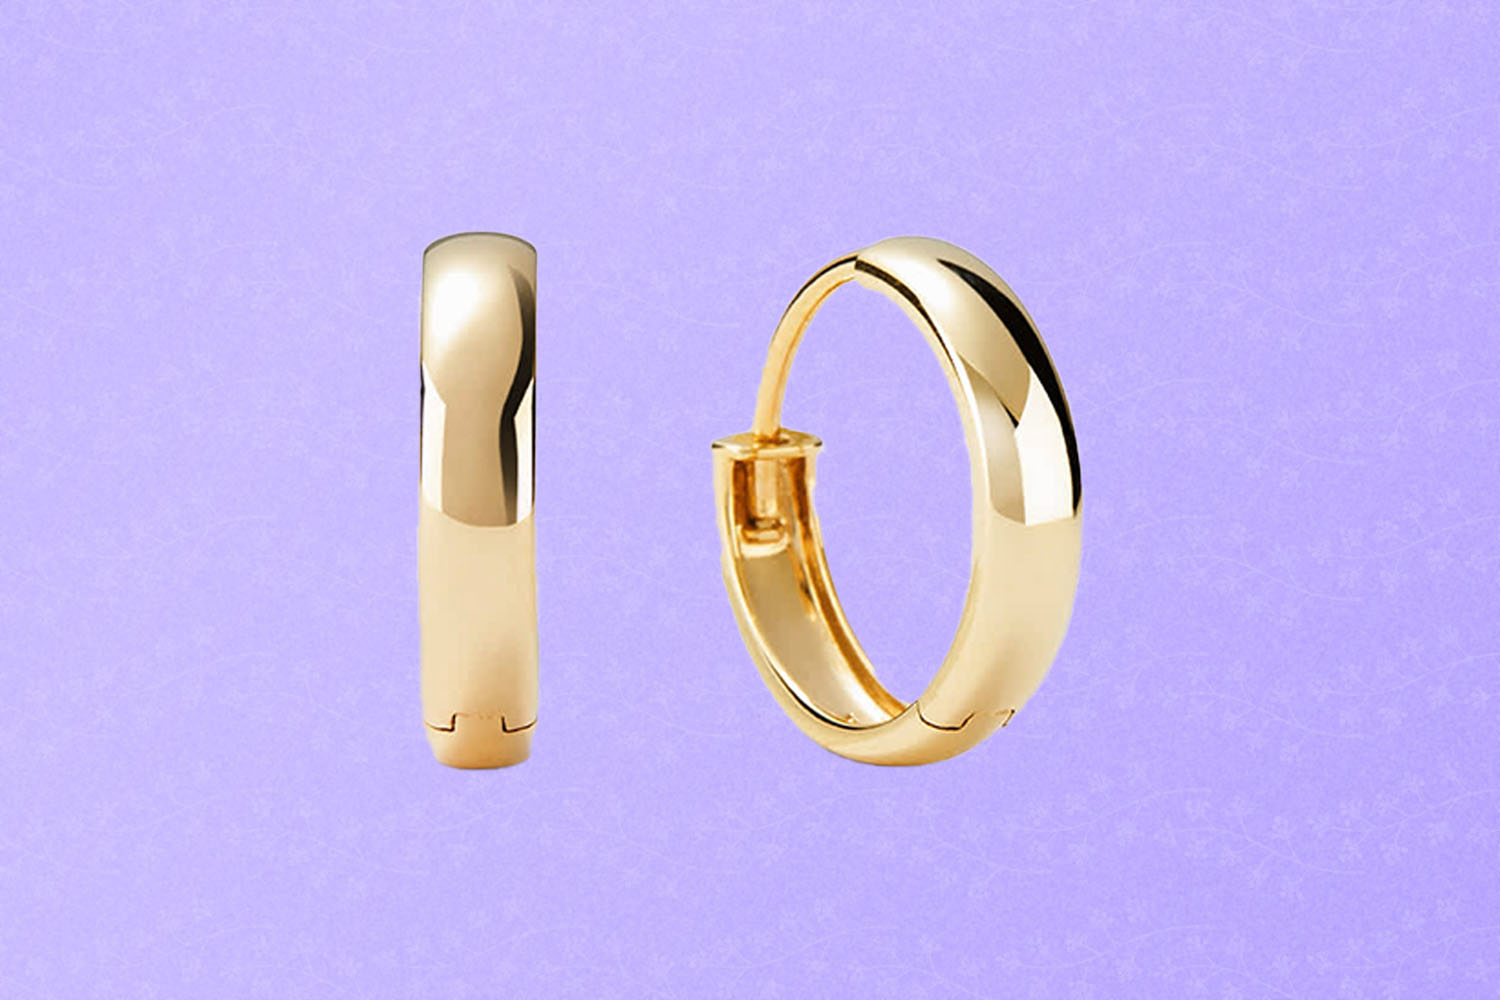 Small gold hoop earrings, a perfect Mother's Day gift for 2022, on a purple background.